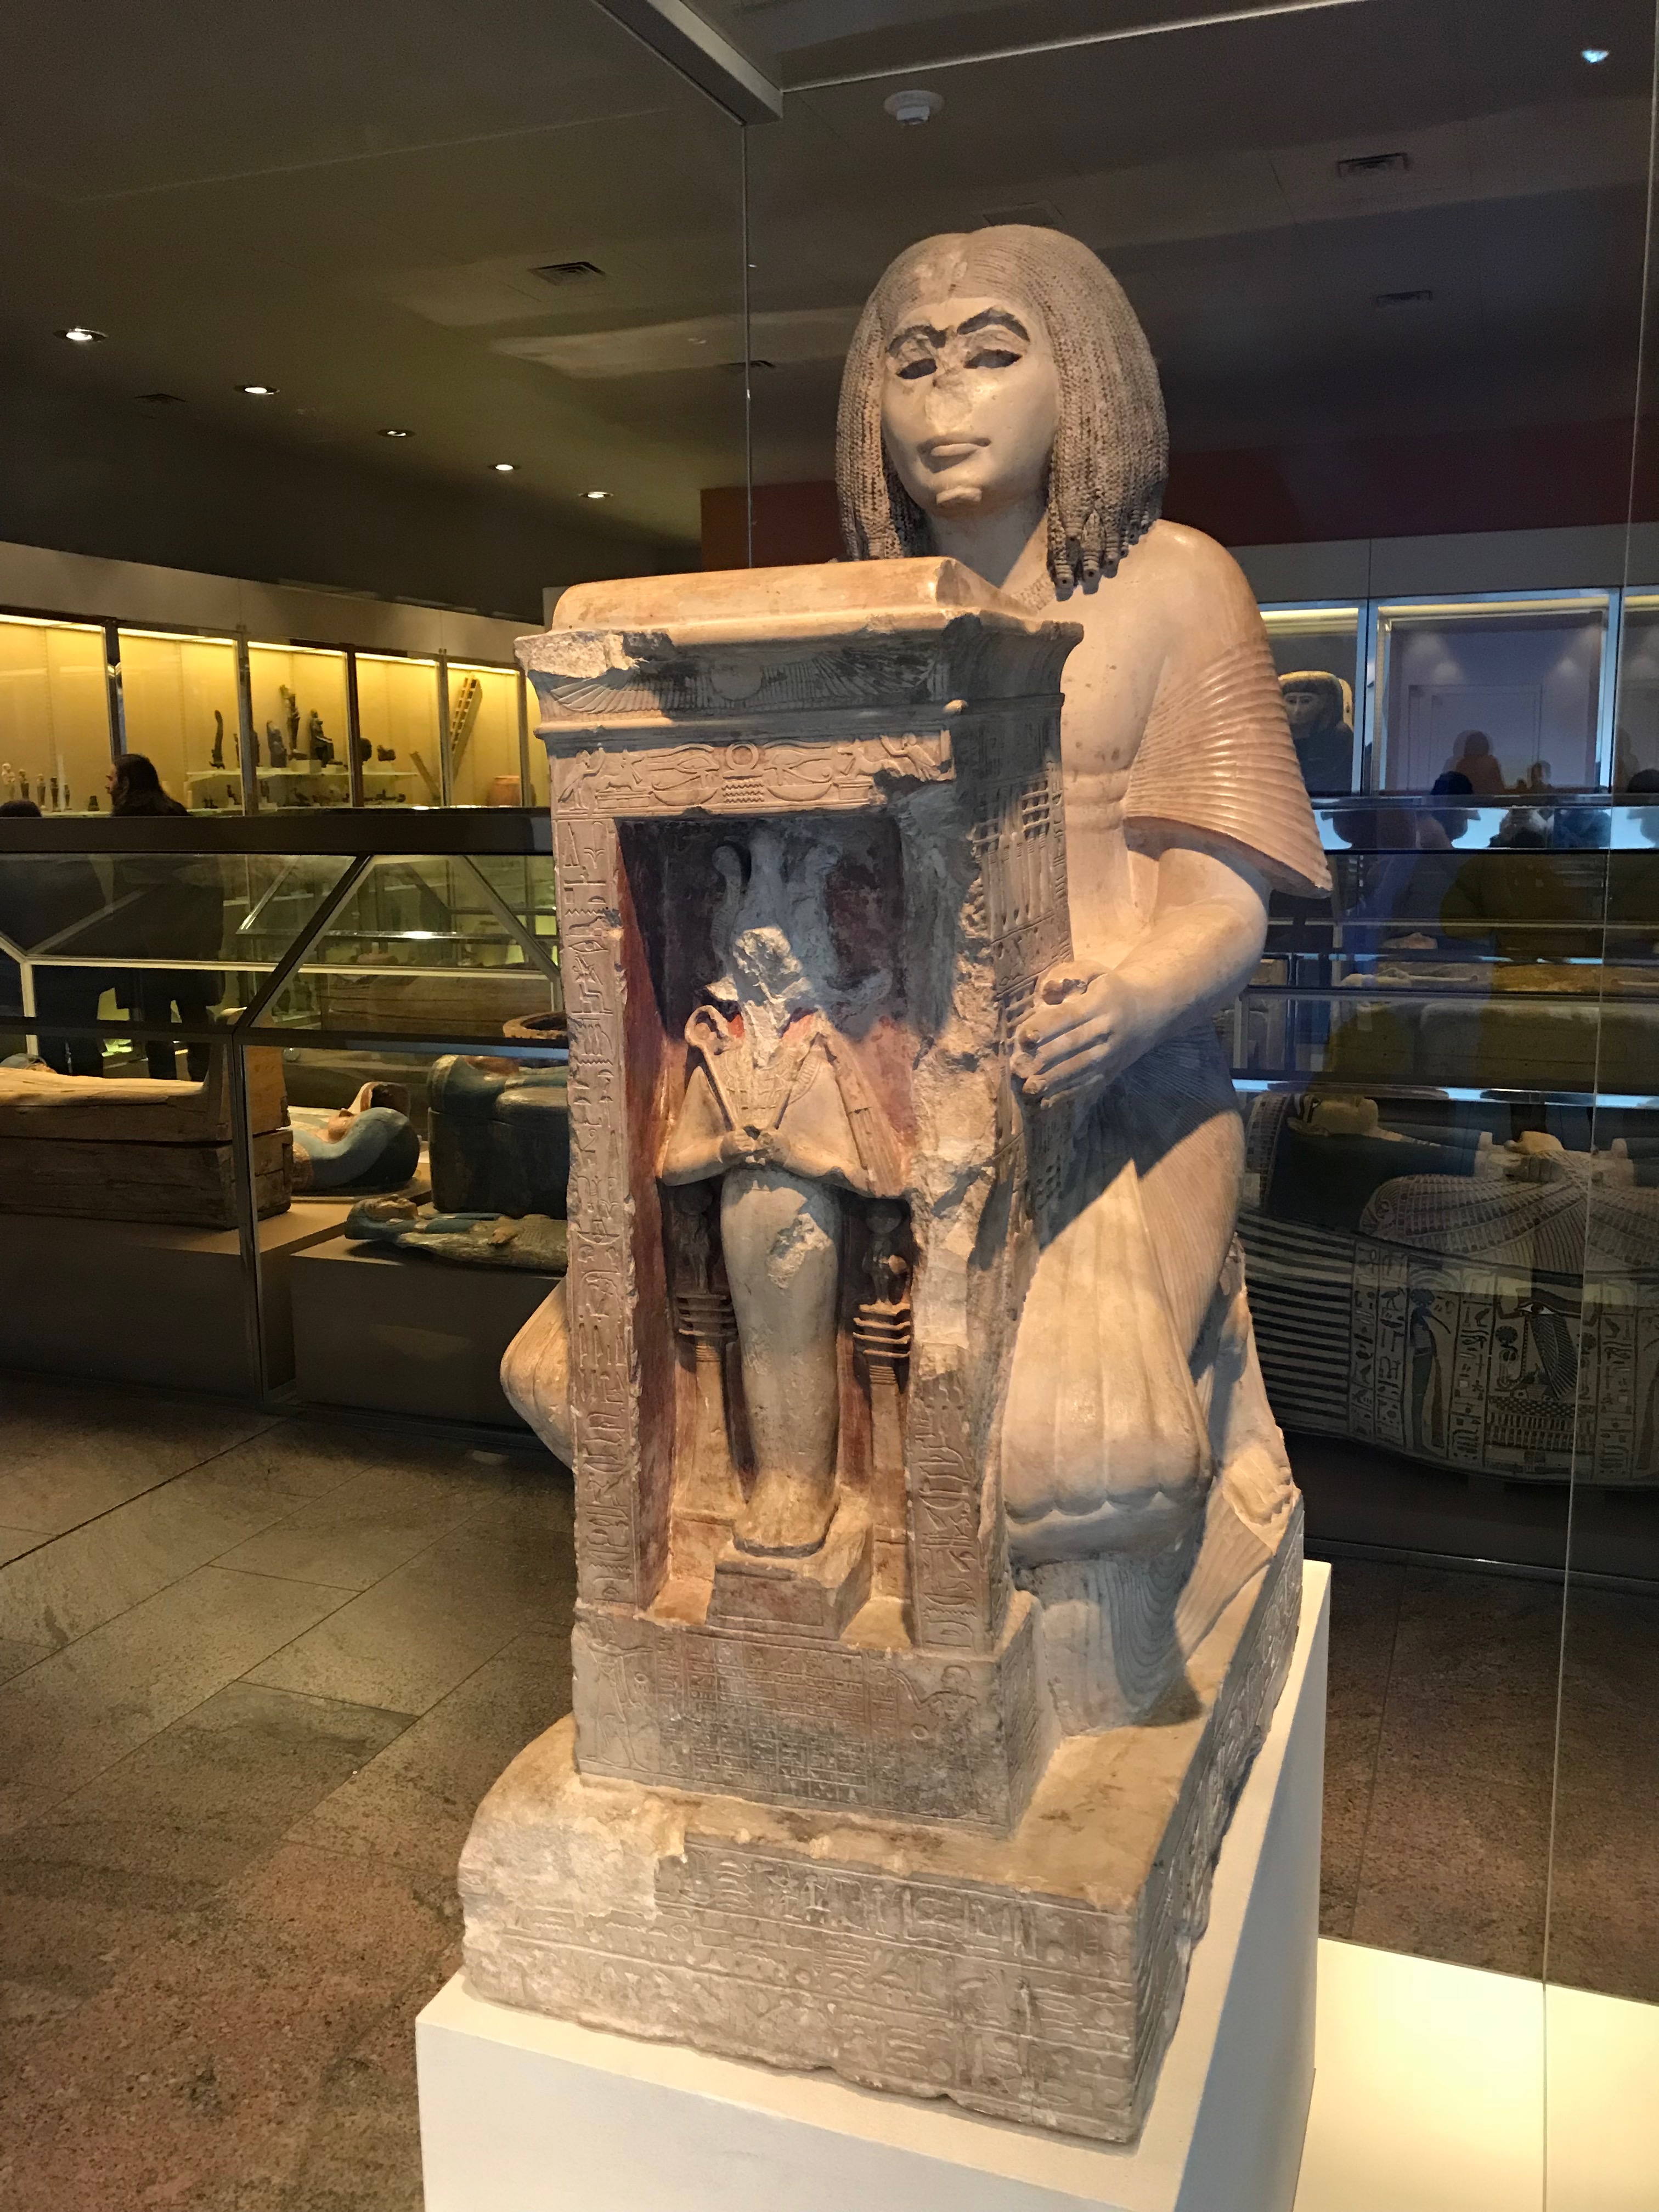 The Kneeling Statue of Yuny, housed in the Sackler Wing of the Metropolitan Museum of Art in New York City. (DCNF/Ethan Barton)